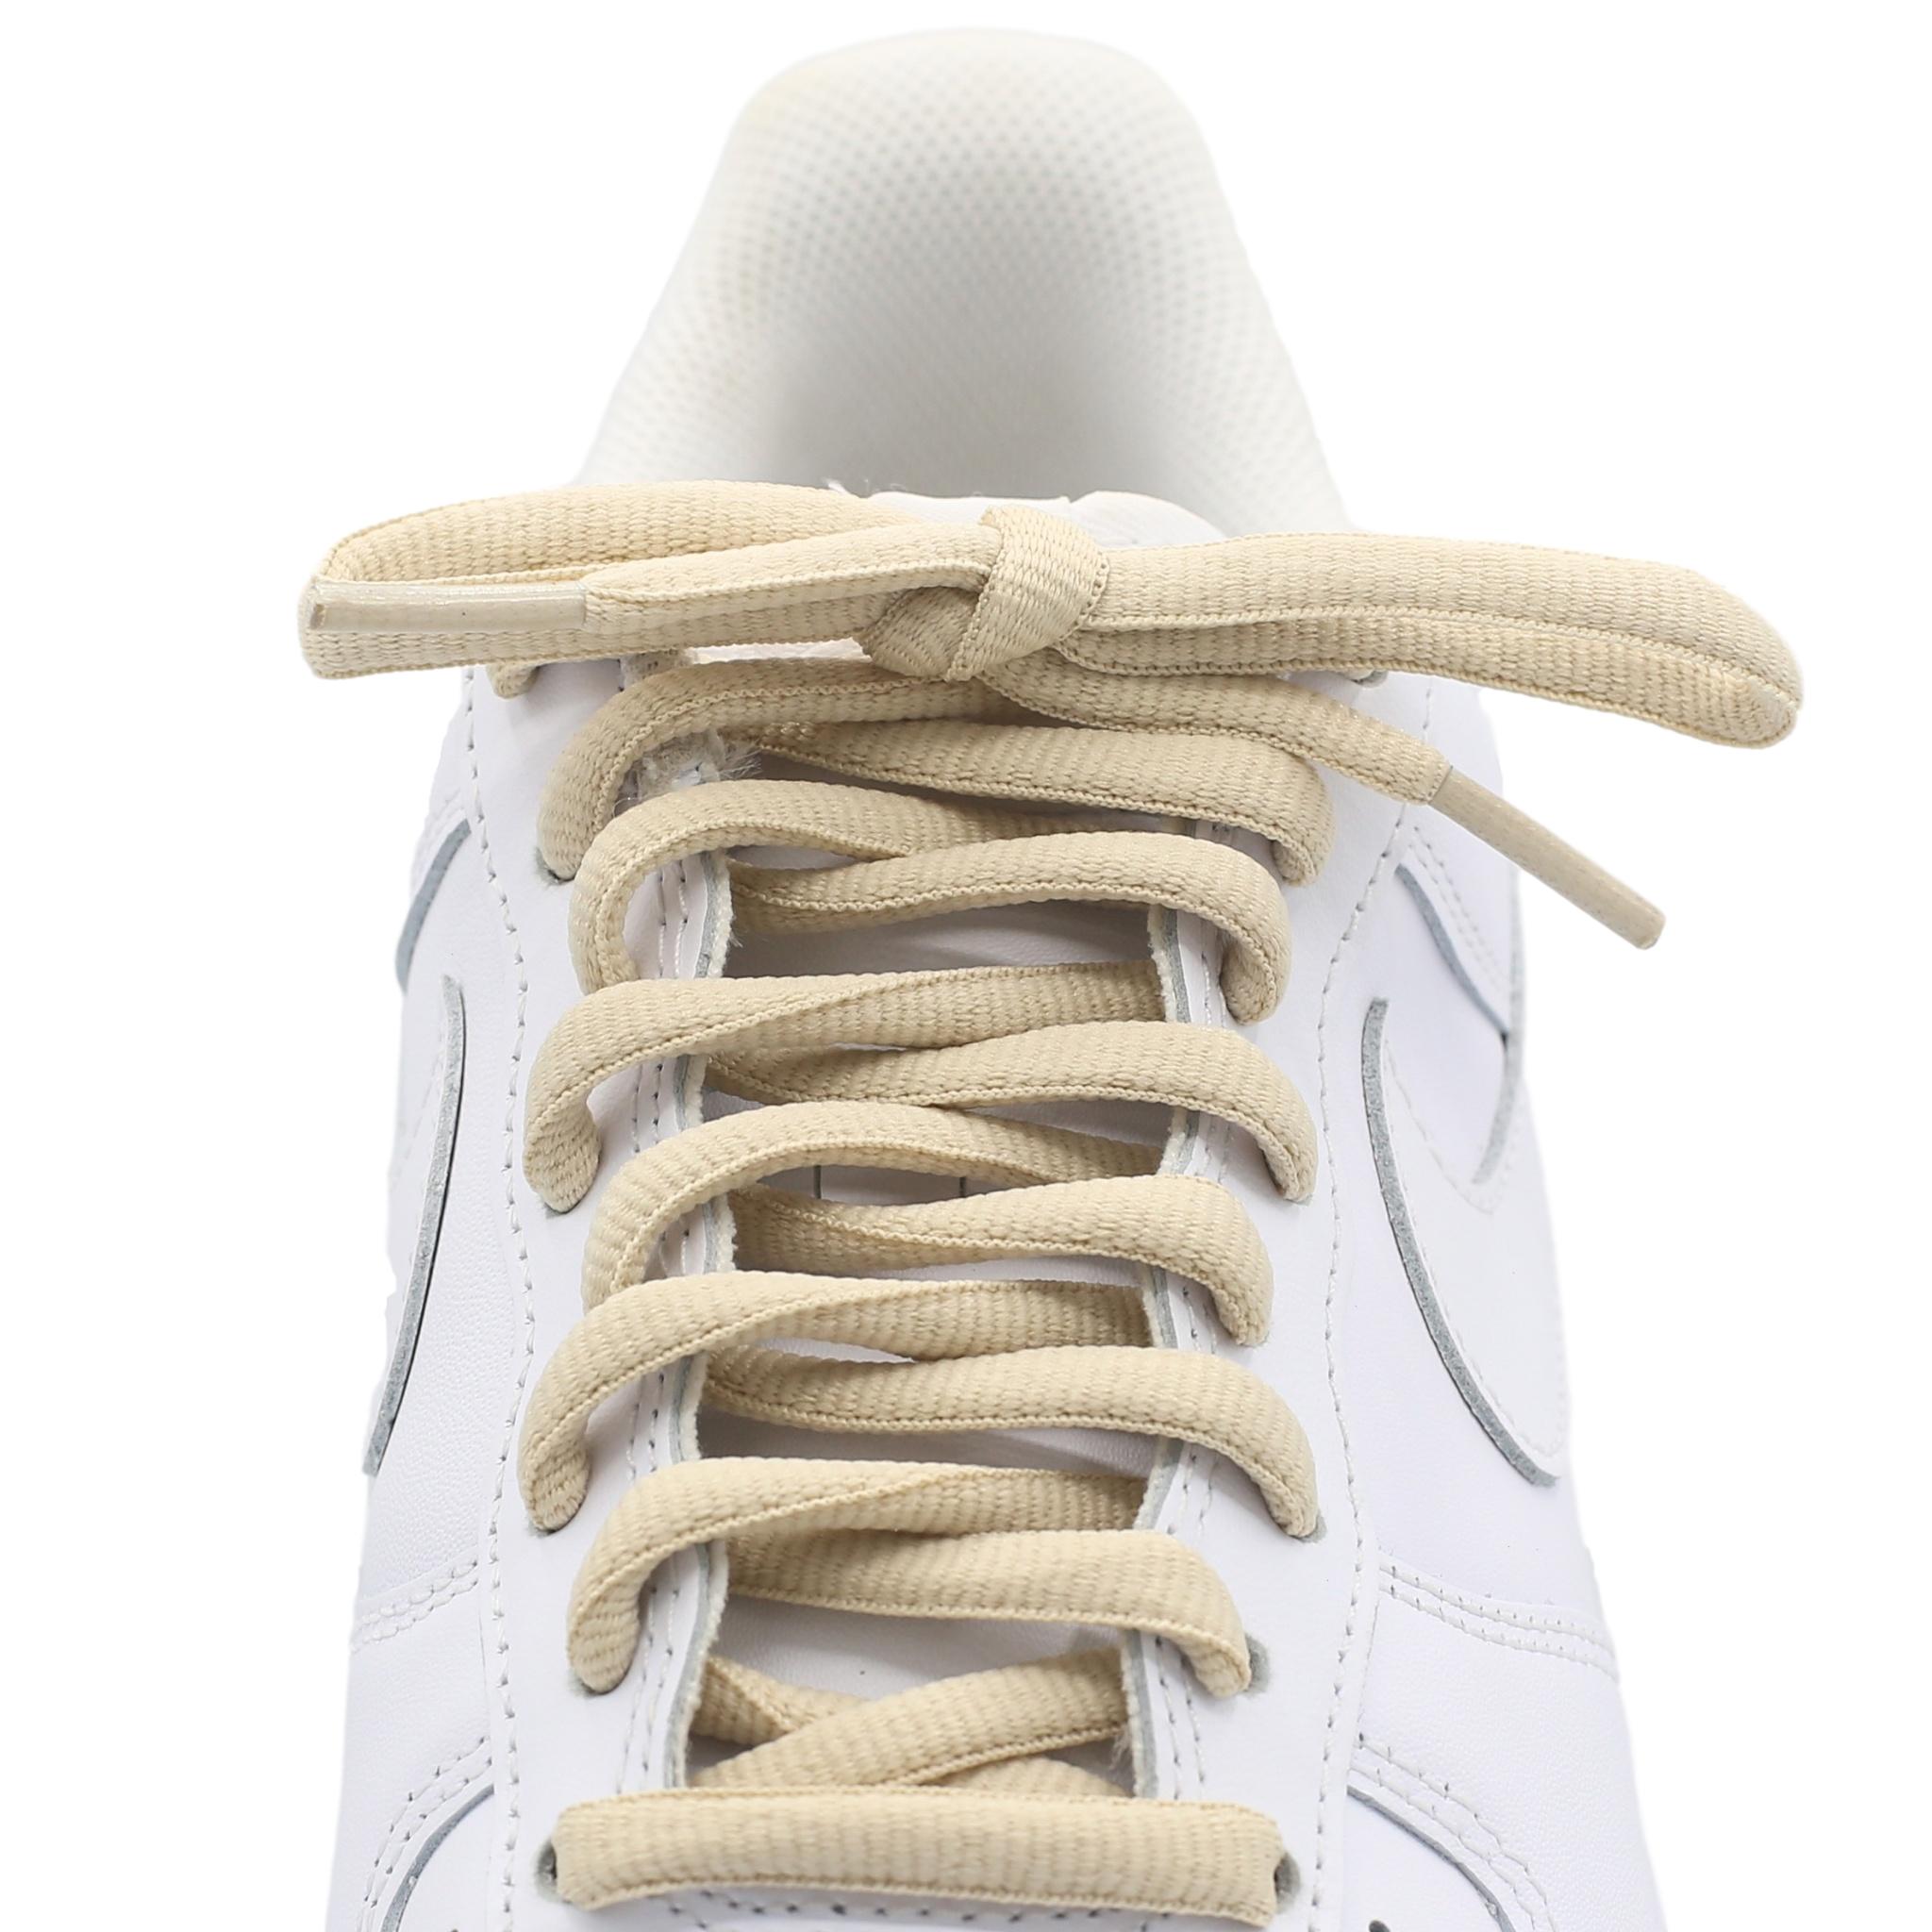 Thick Oval Shoe Laces (Nike SB Laces) – Shoe Lace Supply